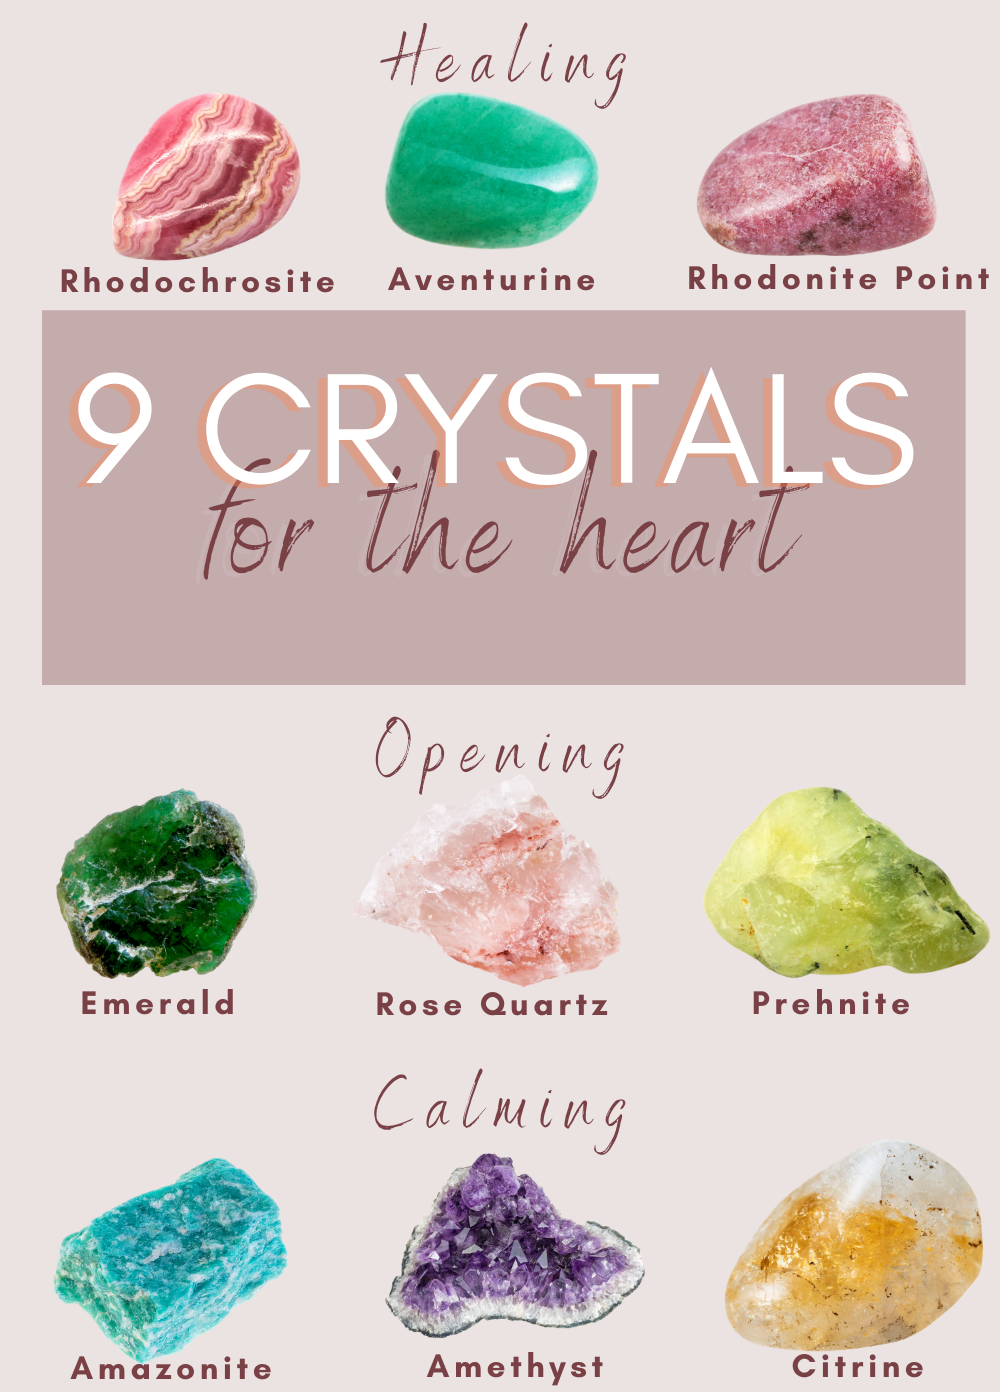 Nine Crystals for for Heart Healing, Opening and Calming